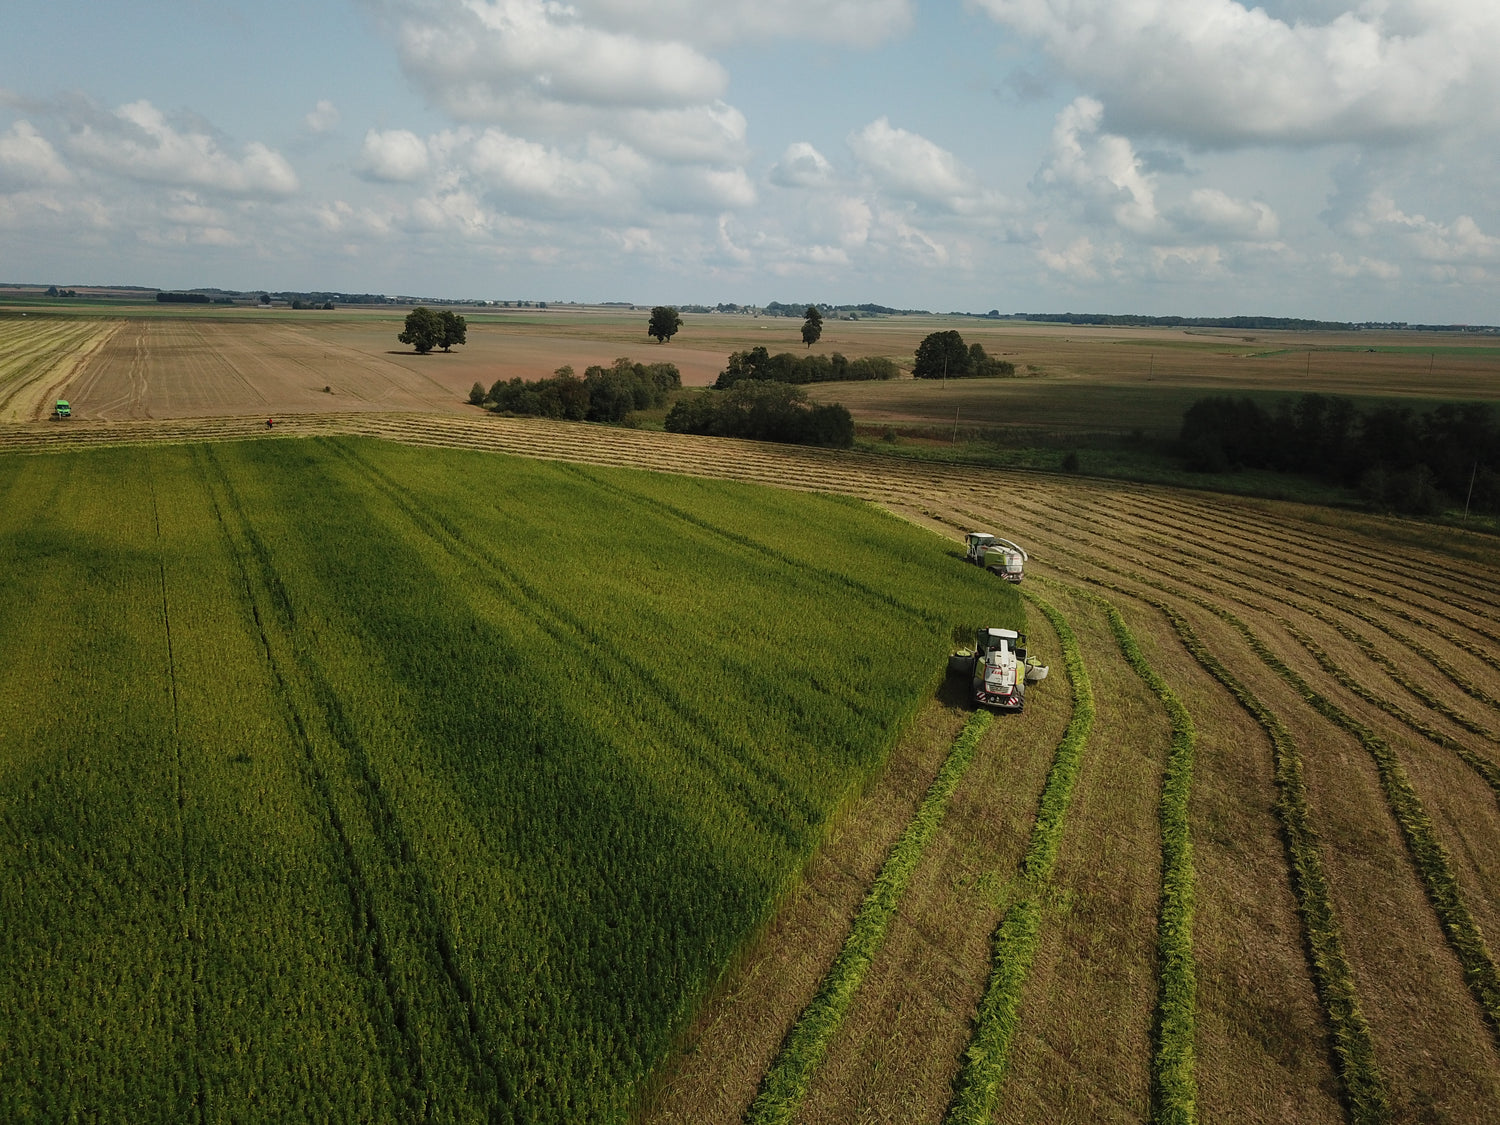 Aerial view of hemp field with harvesters